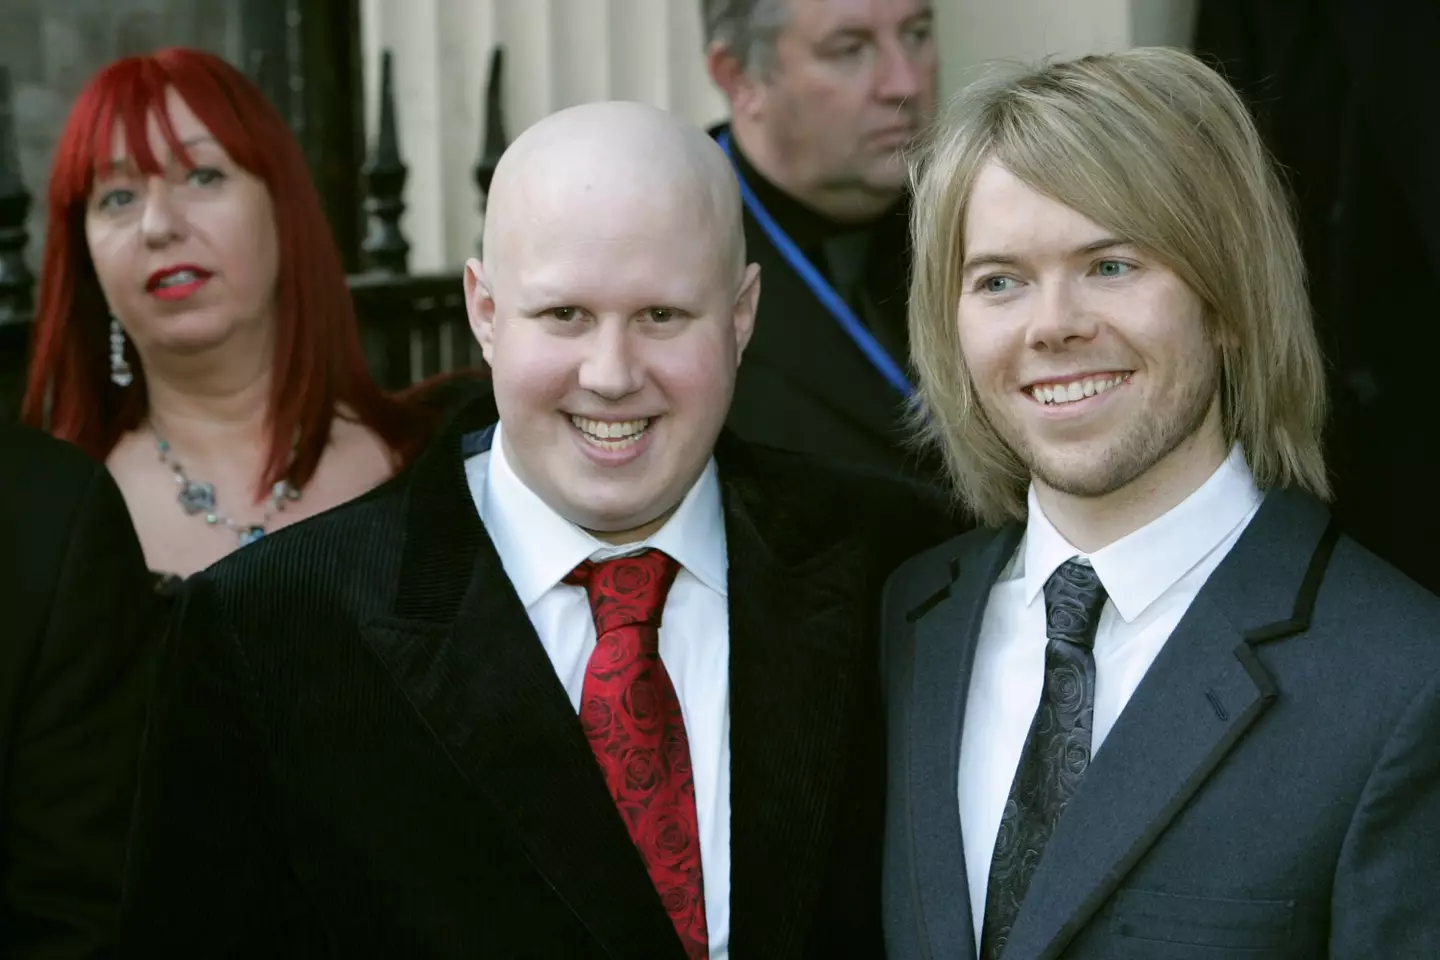 Matt Lucas once opened up on his bereavement following the untimely passing of his ex-partner Kevin McGee.